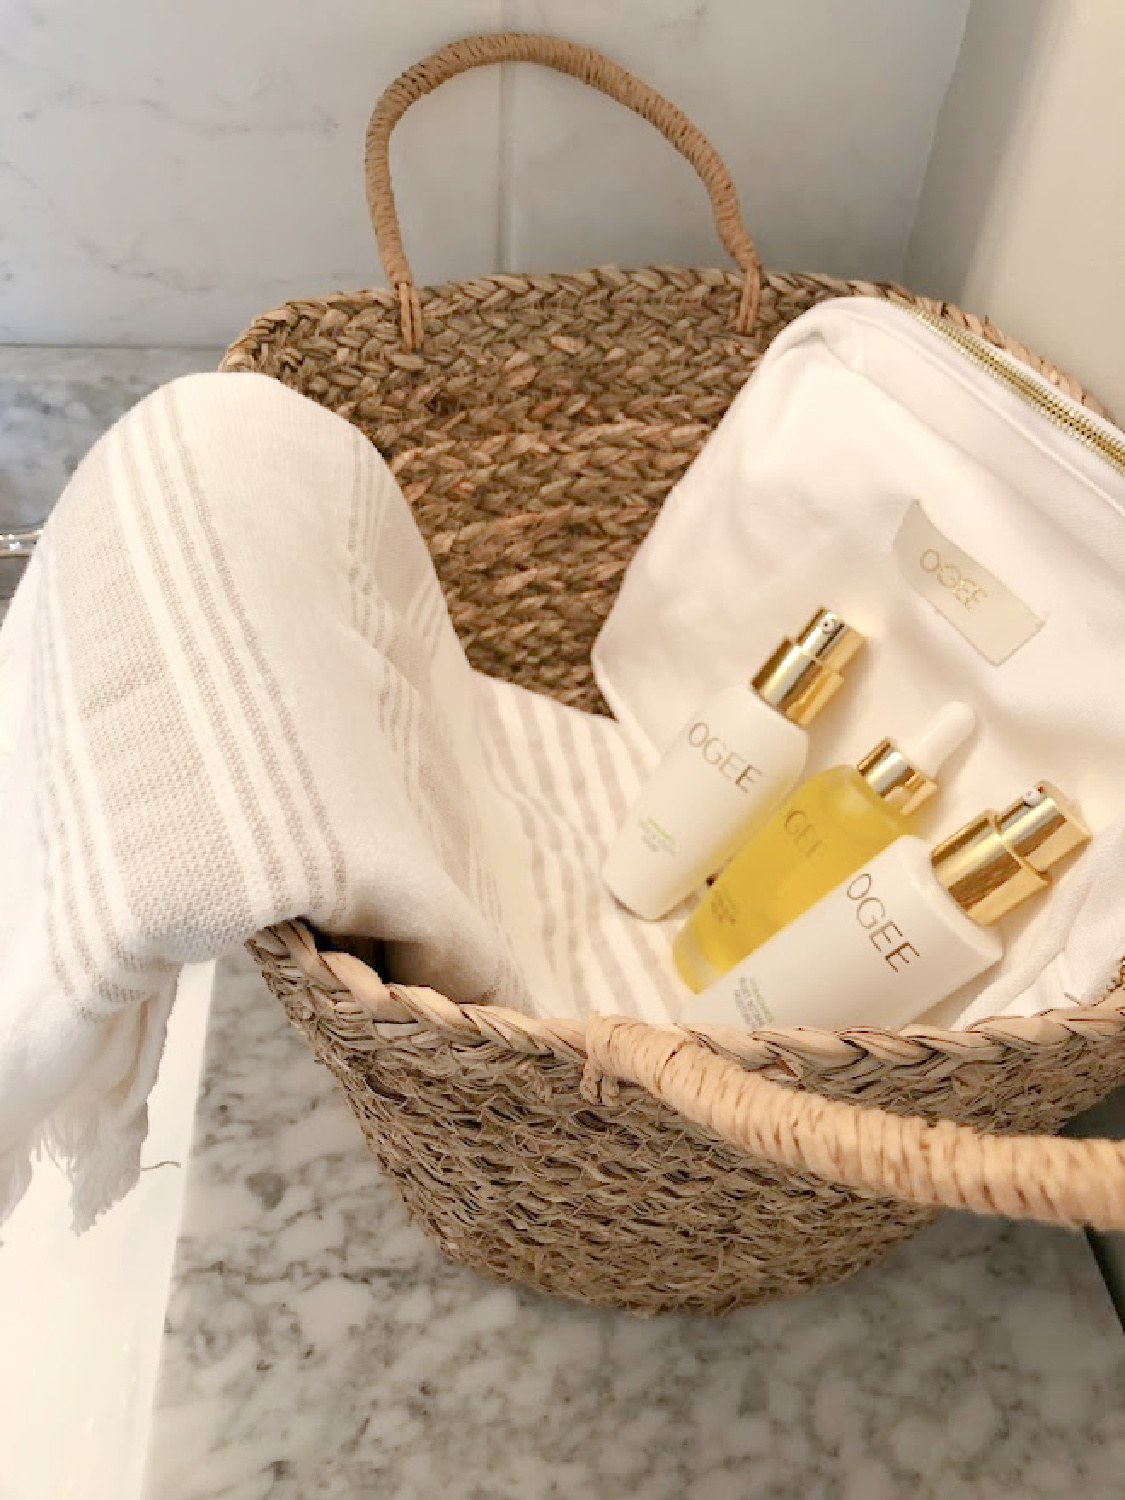 OGEE Glow trio organic skincare potions in a basket on my vanity counter - Hello Lovely Studio. #ogee